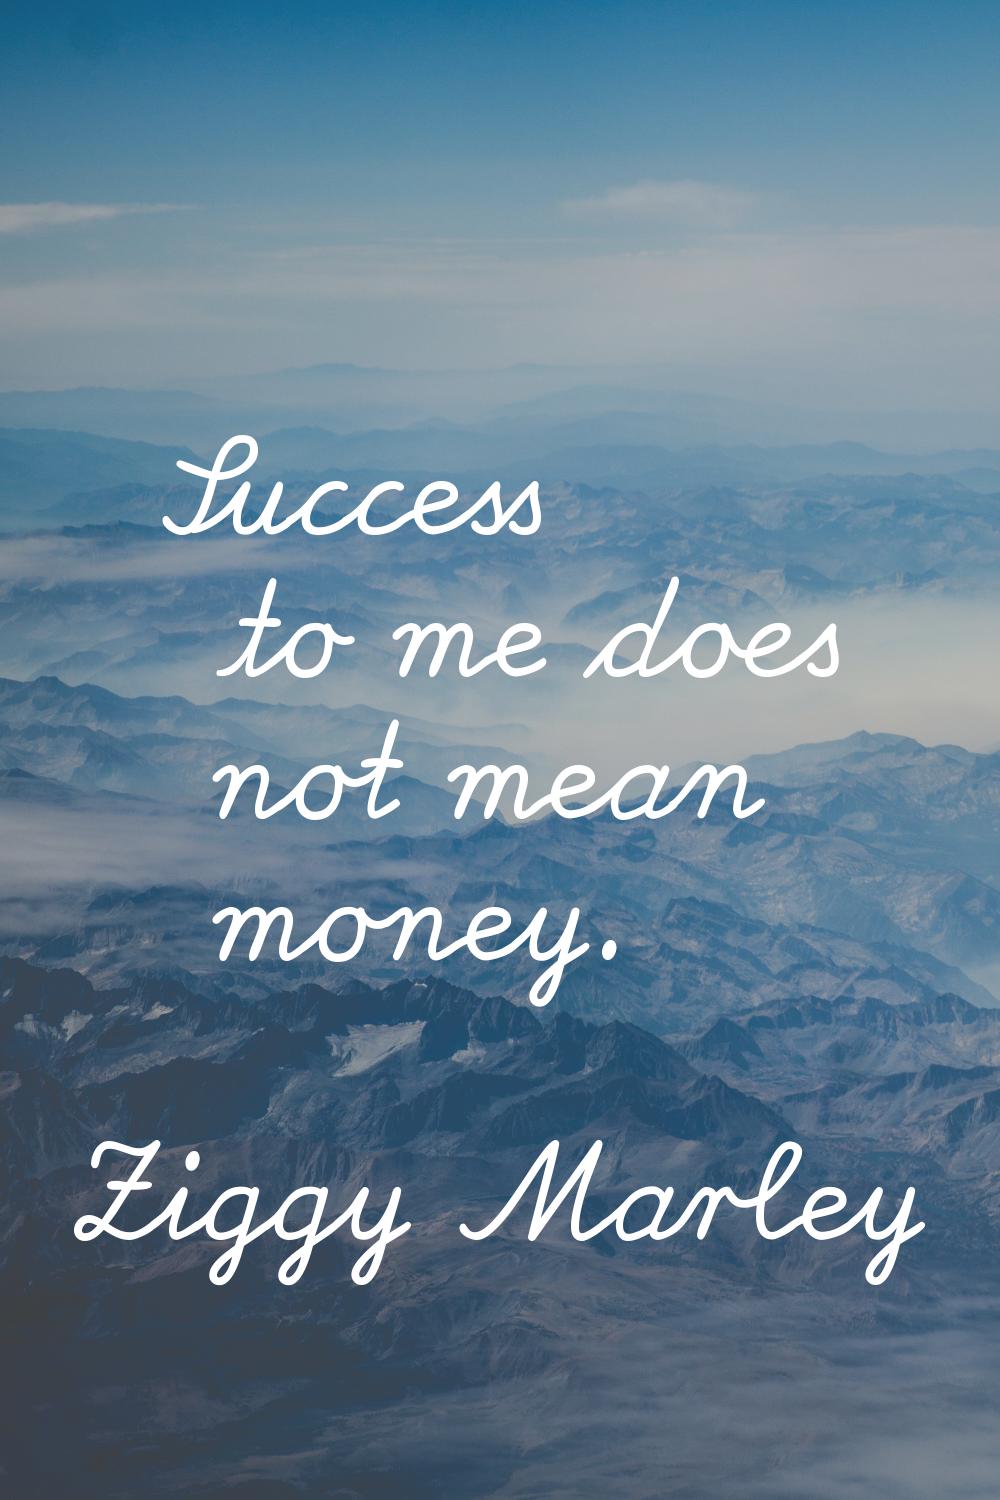 Success to me does not mean money.